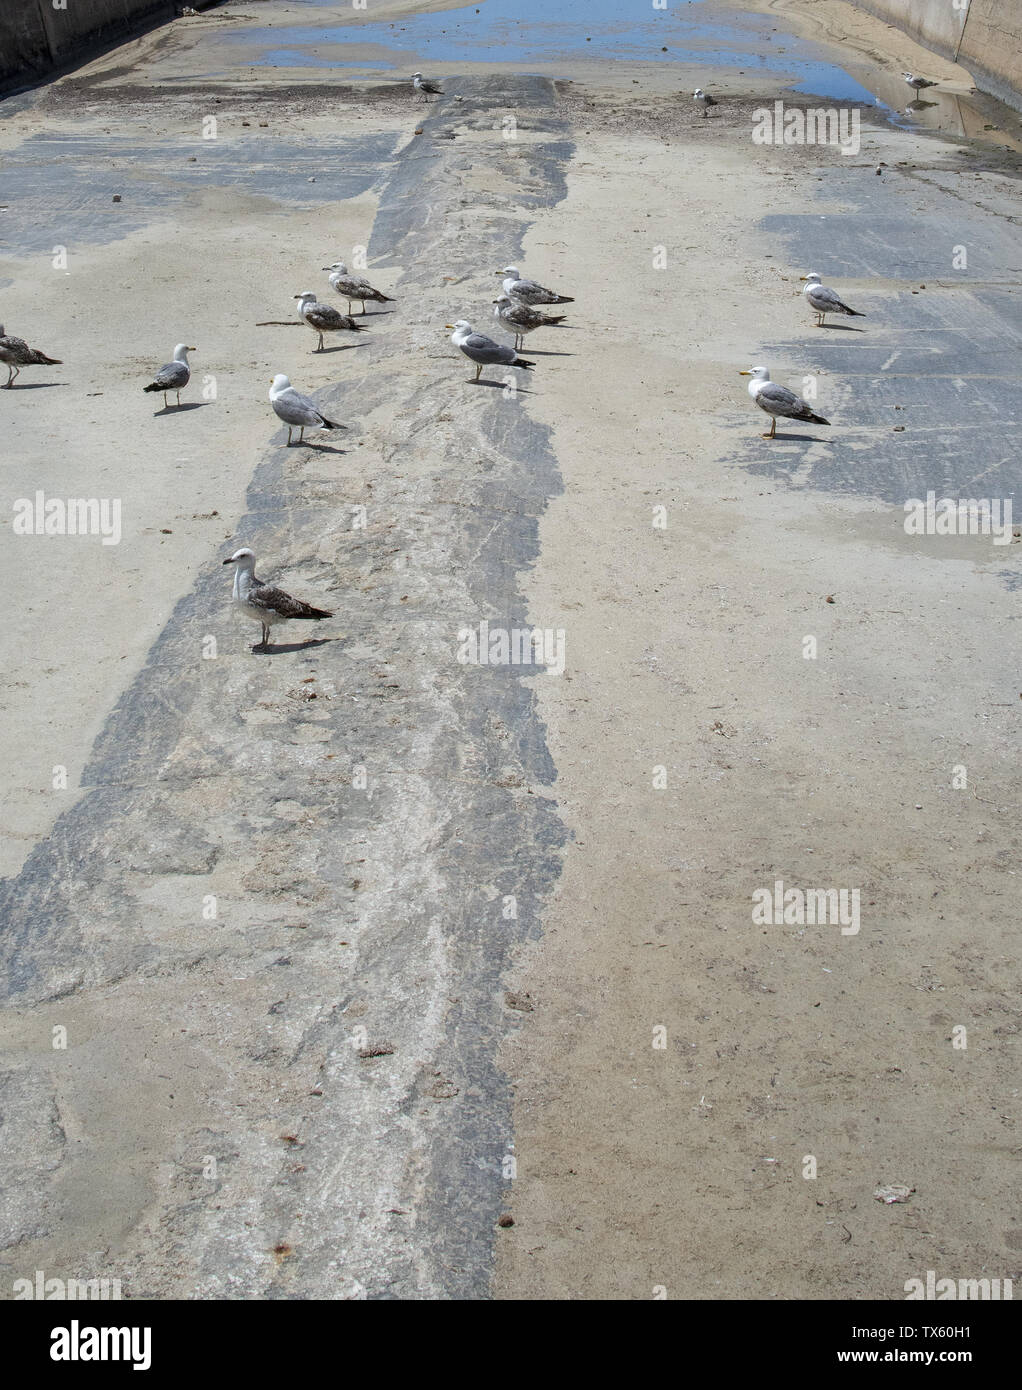 Dry concrete drainage canal with birds and Mediterranean sea in Mallorca, Spain. Stock Photo